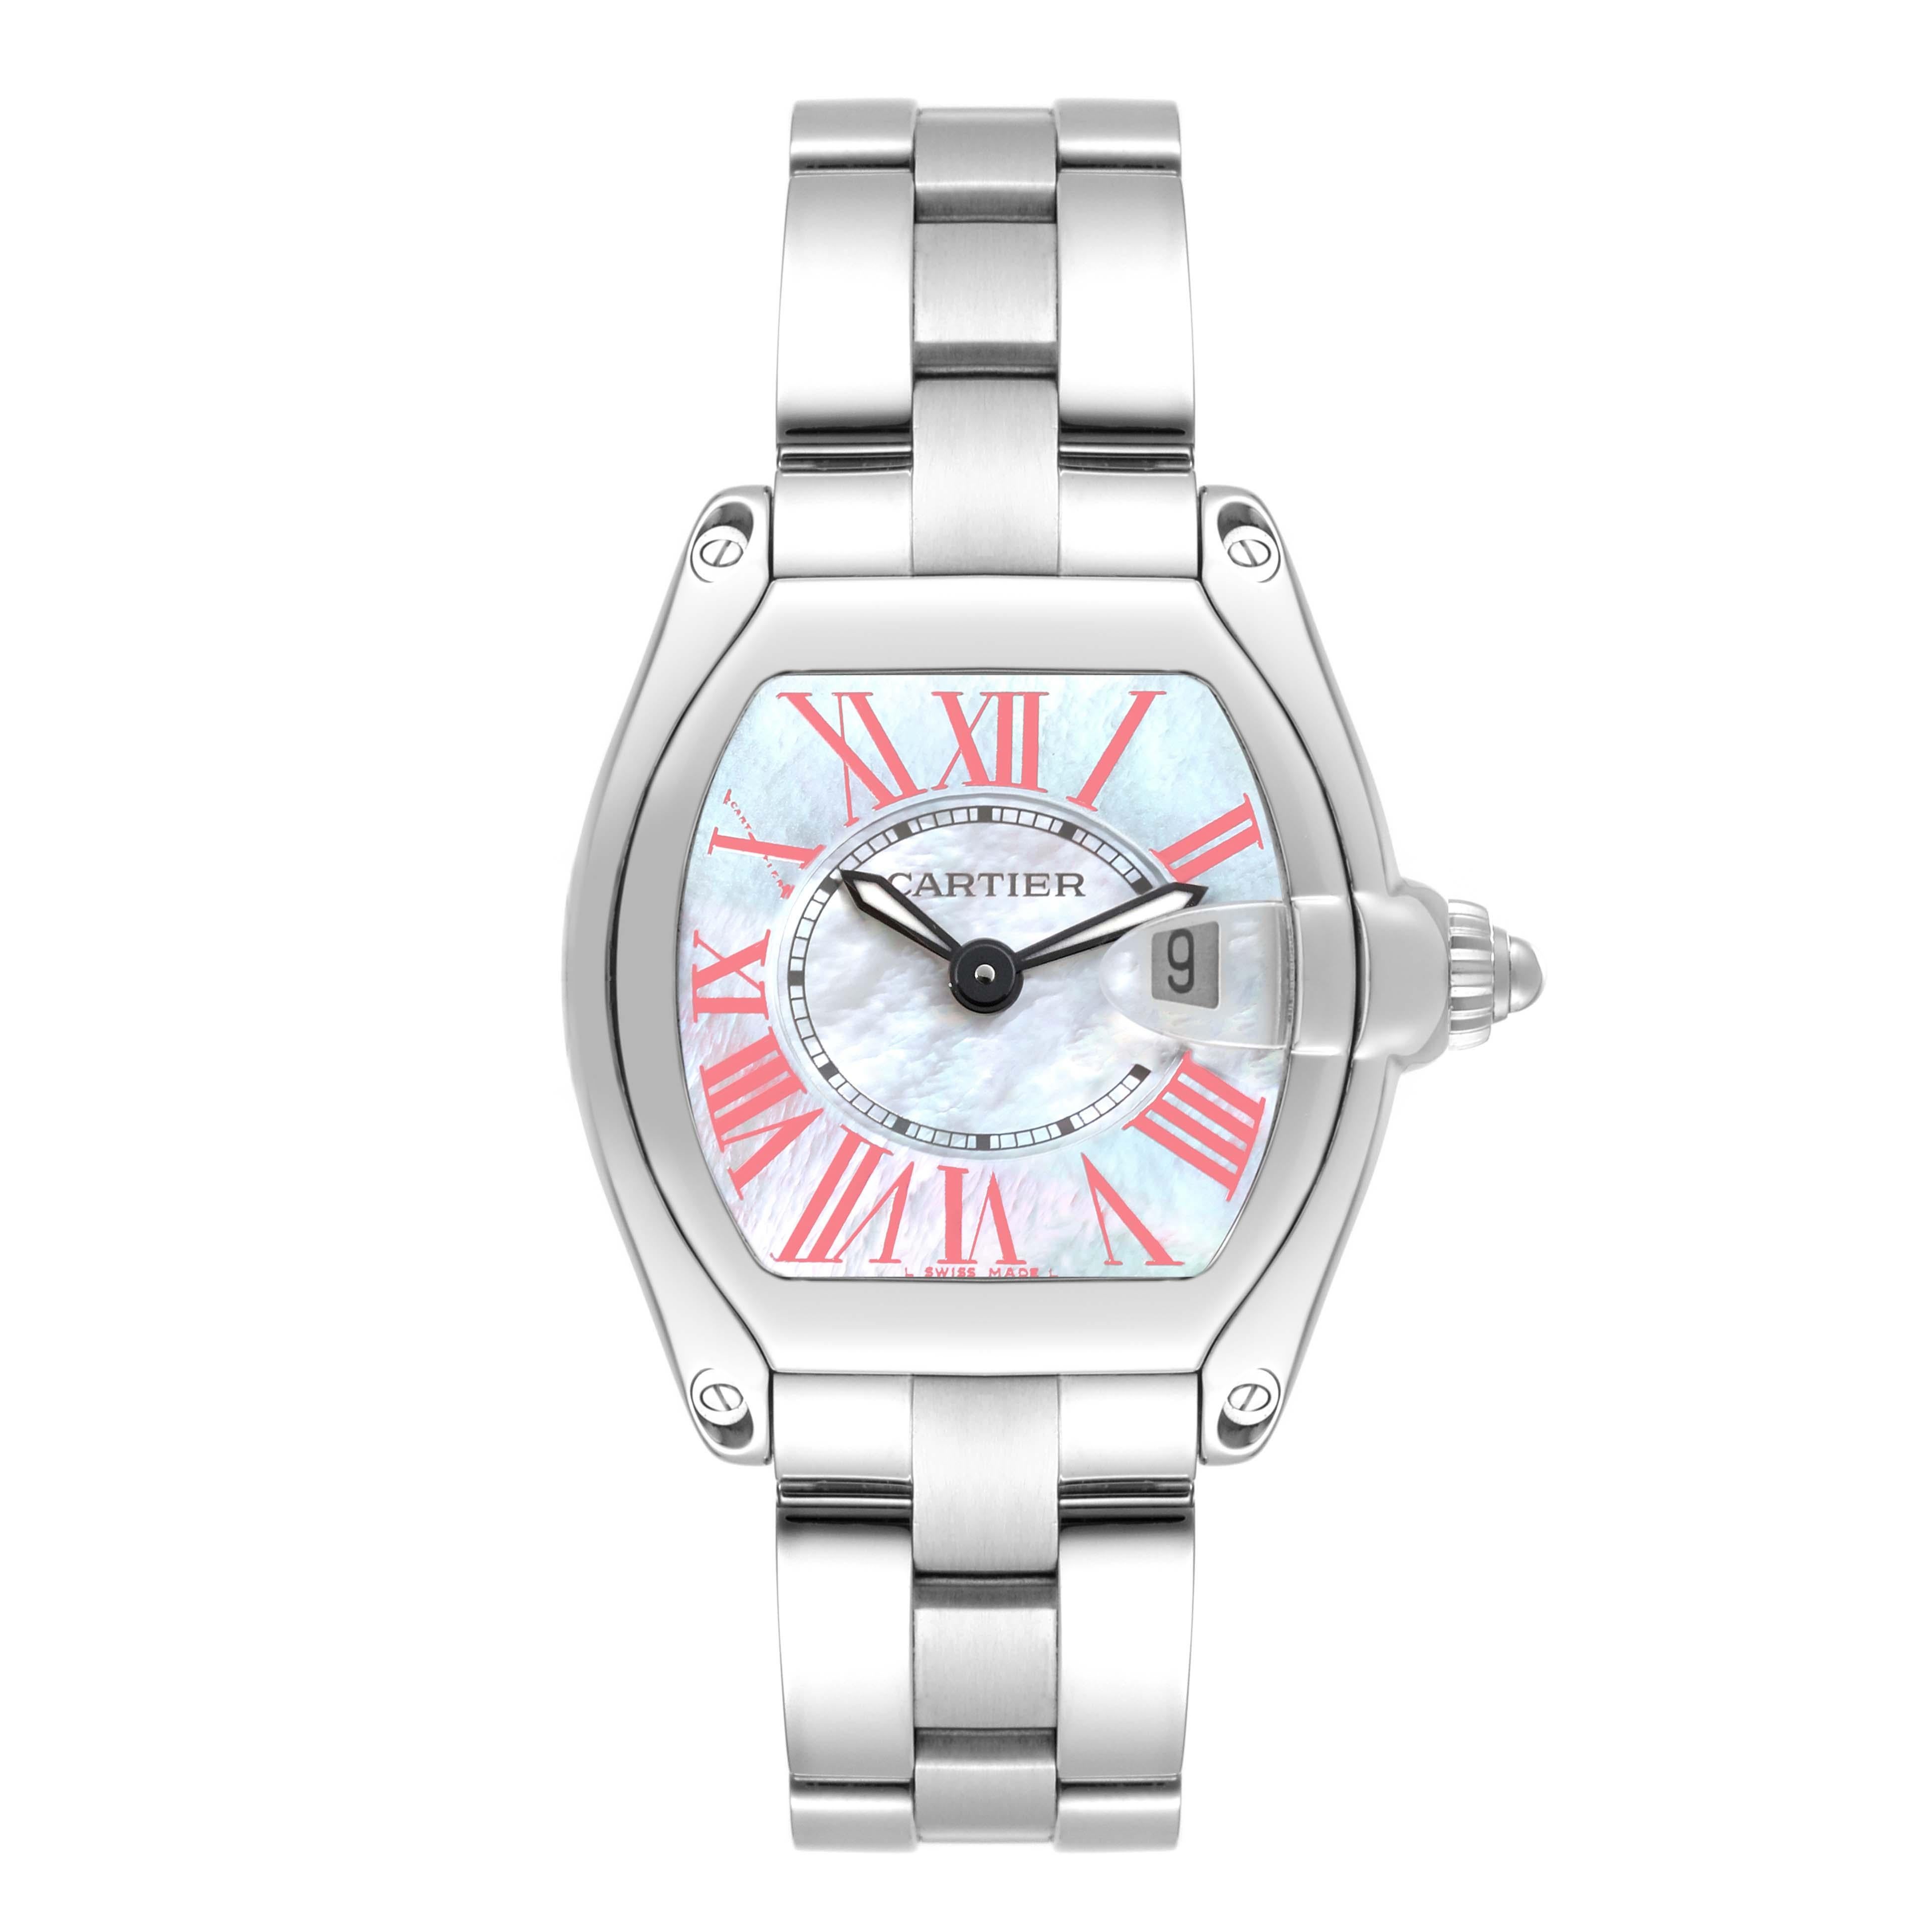 Cartier Roadster Mother of Pearl Dial Steel Ladies Watch W6206006. Swiss quartz movement calibre 688. Stainless steel tonneau shaped case 36 x 30 mm. . Scratch resistant sapphire crystal with cyclops magnifier. Mother of pearl dial with pink Roman